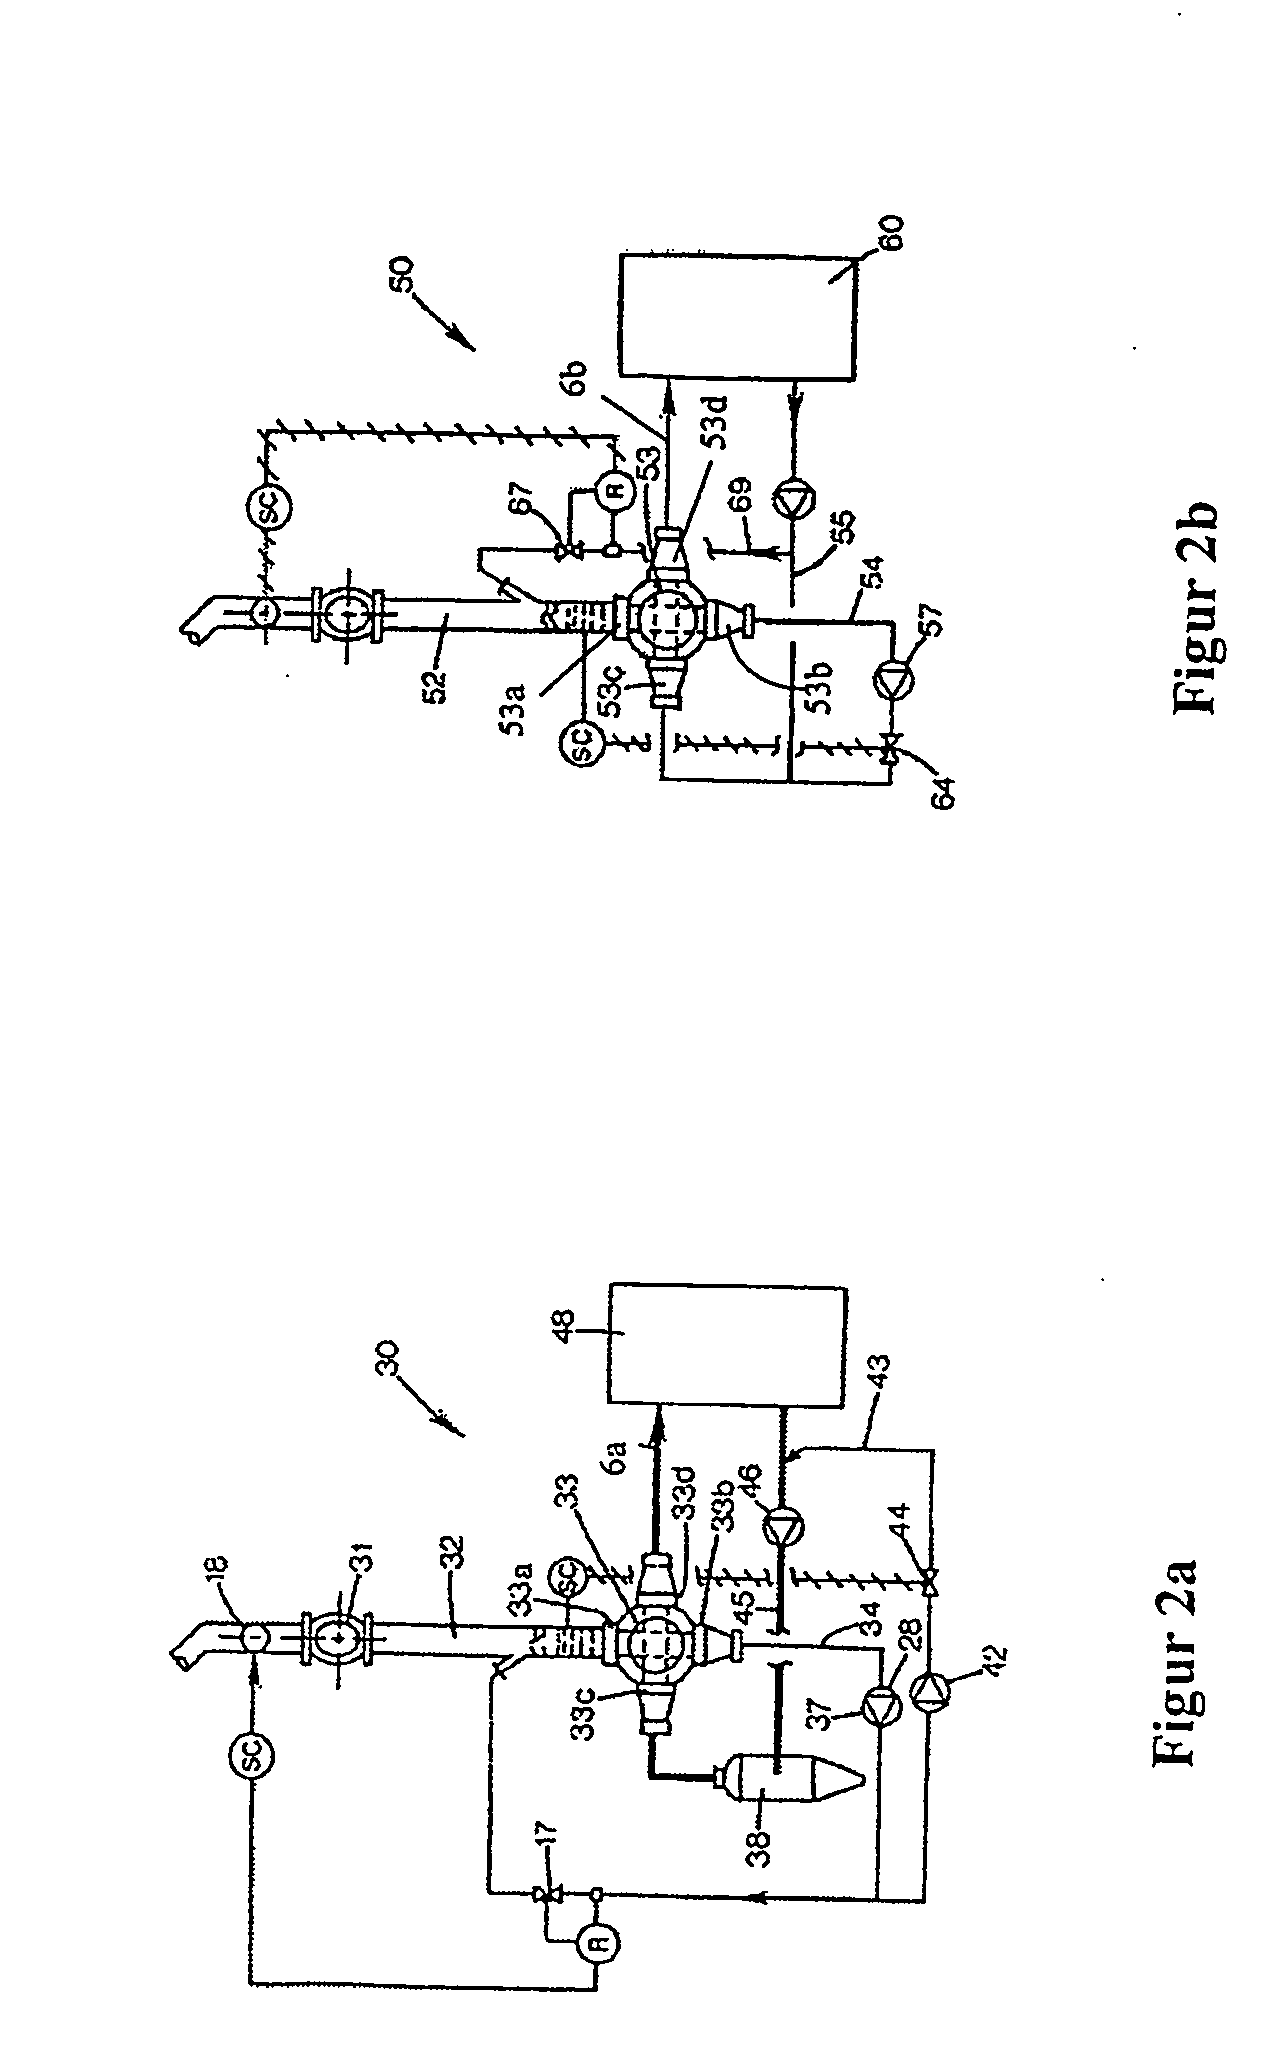 Method for the feed of cellulose chips during the continuous cooking of cellulose